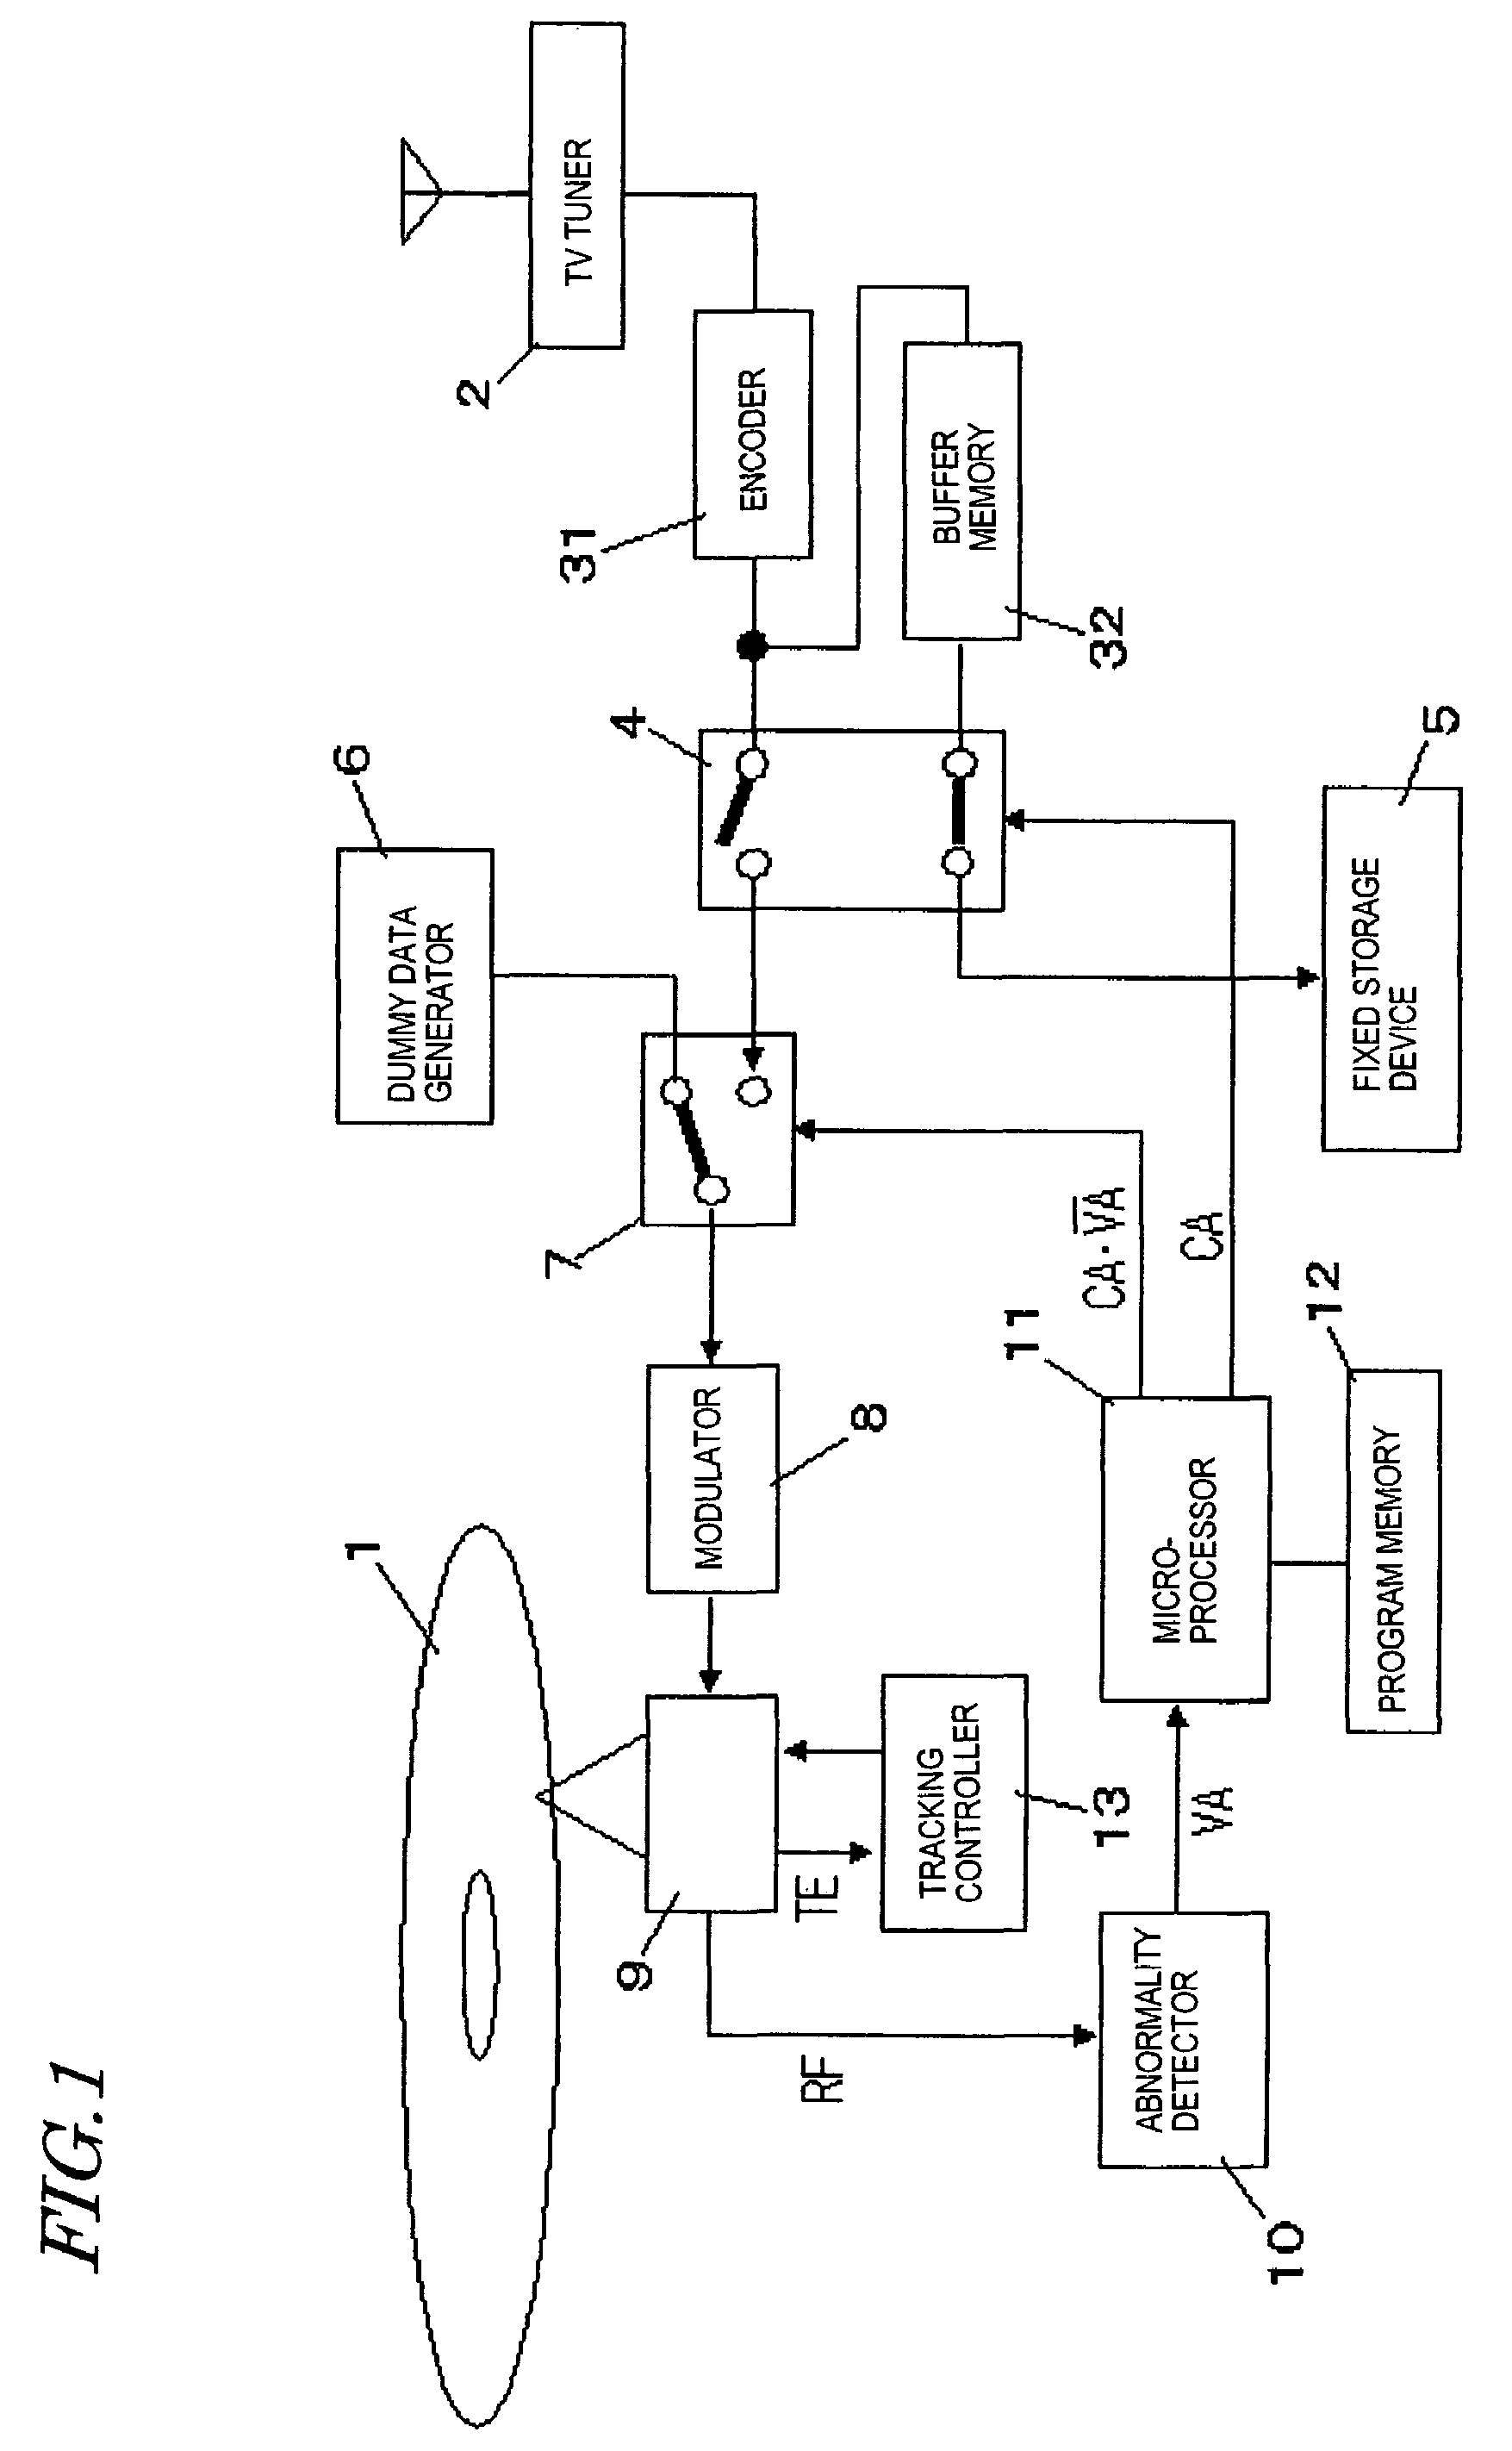 Digital video recorder, method of driving the video recorder and program